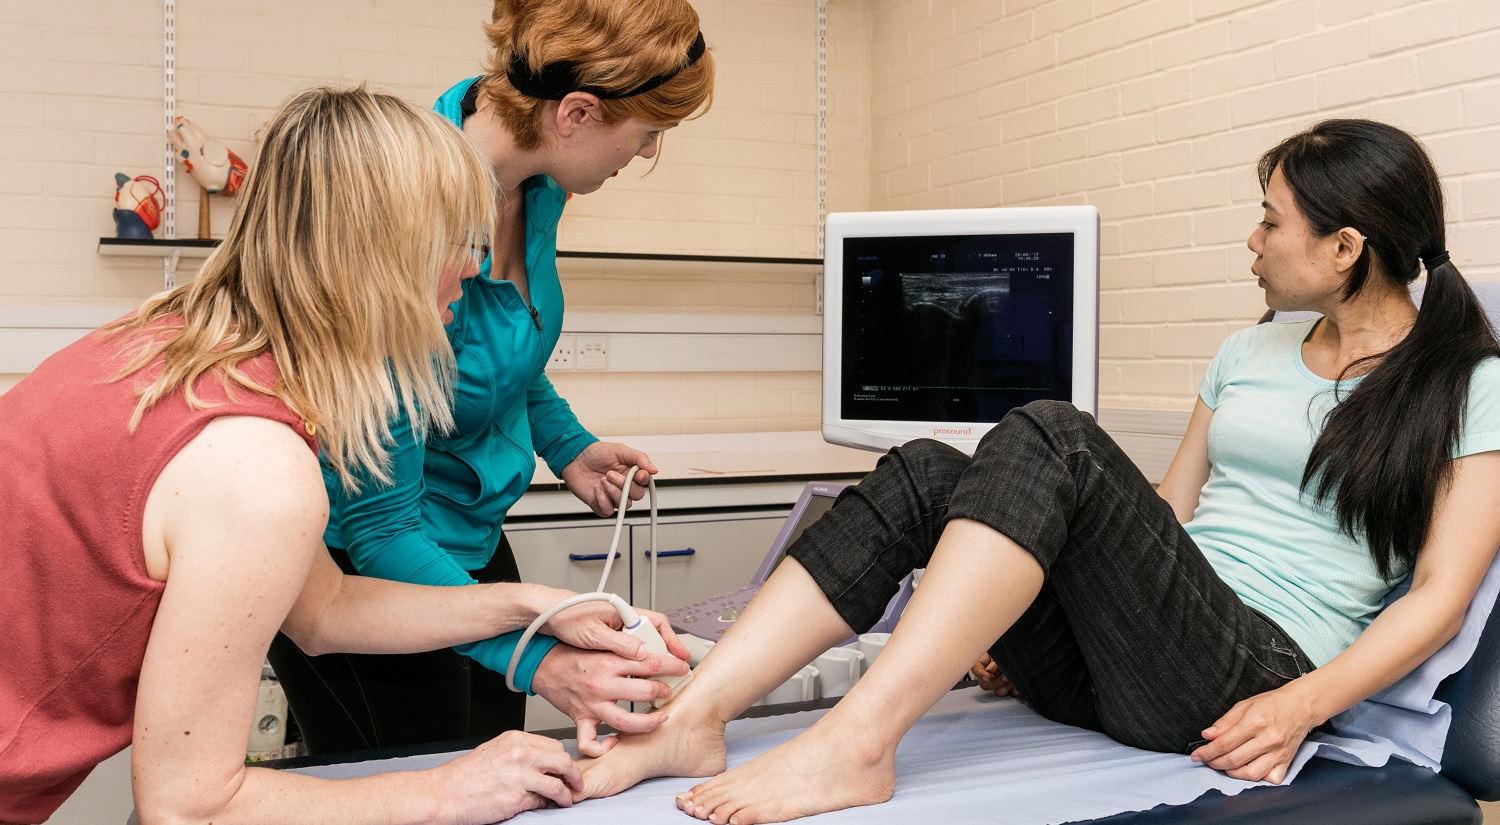 A student and teacher using ultrasound to examine a patient's foot.